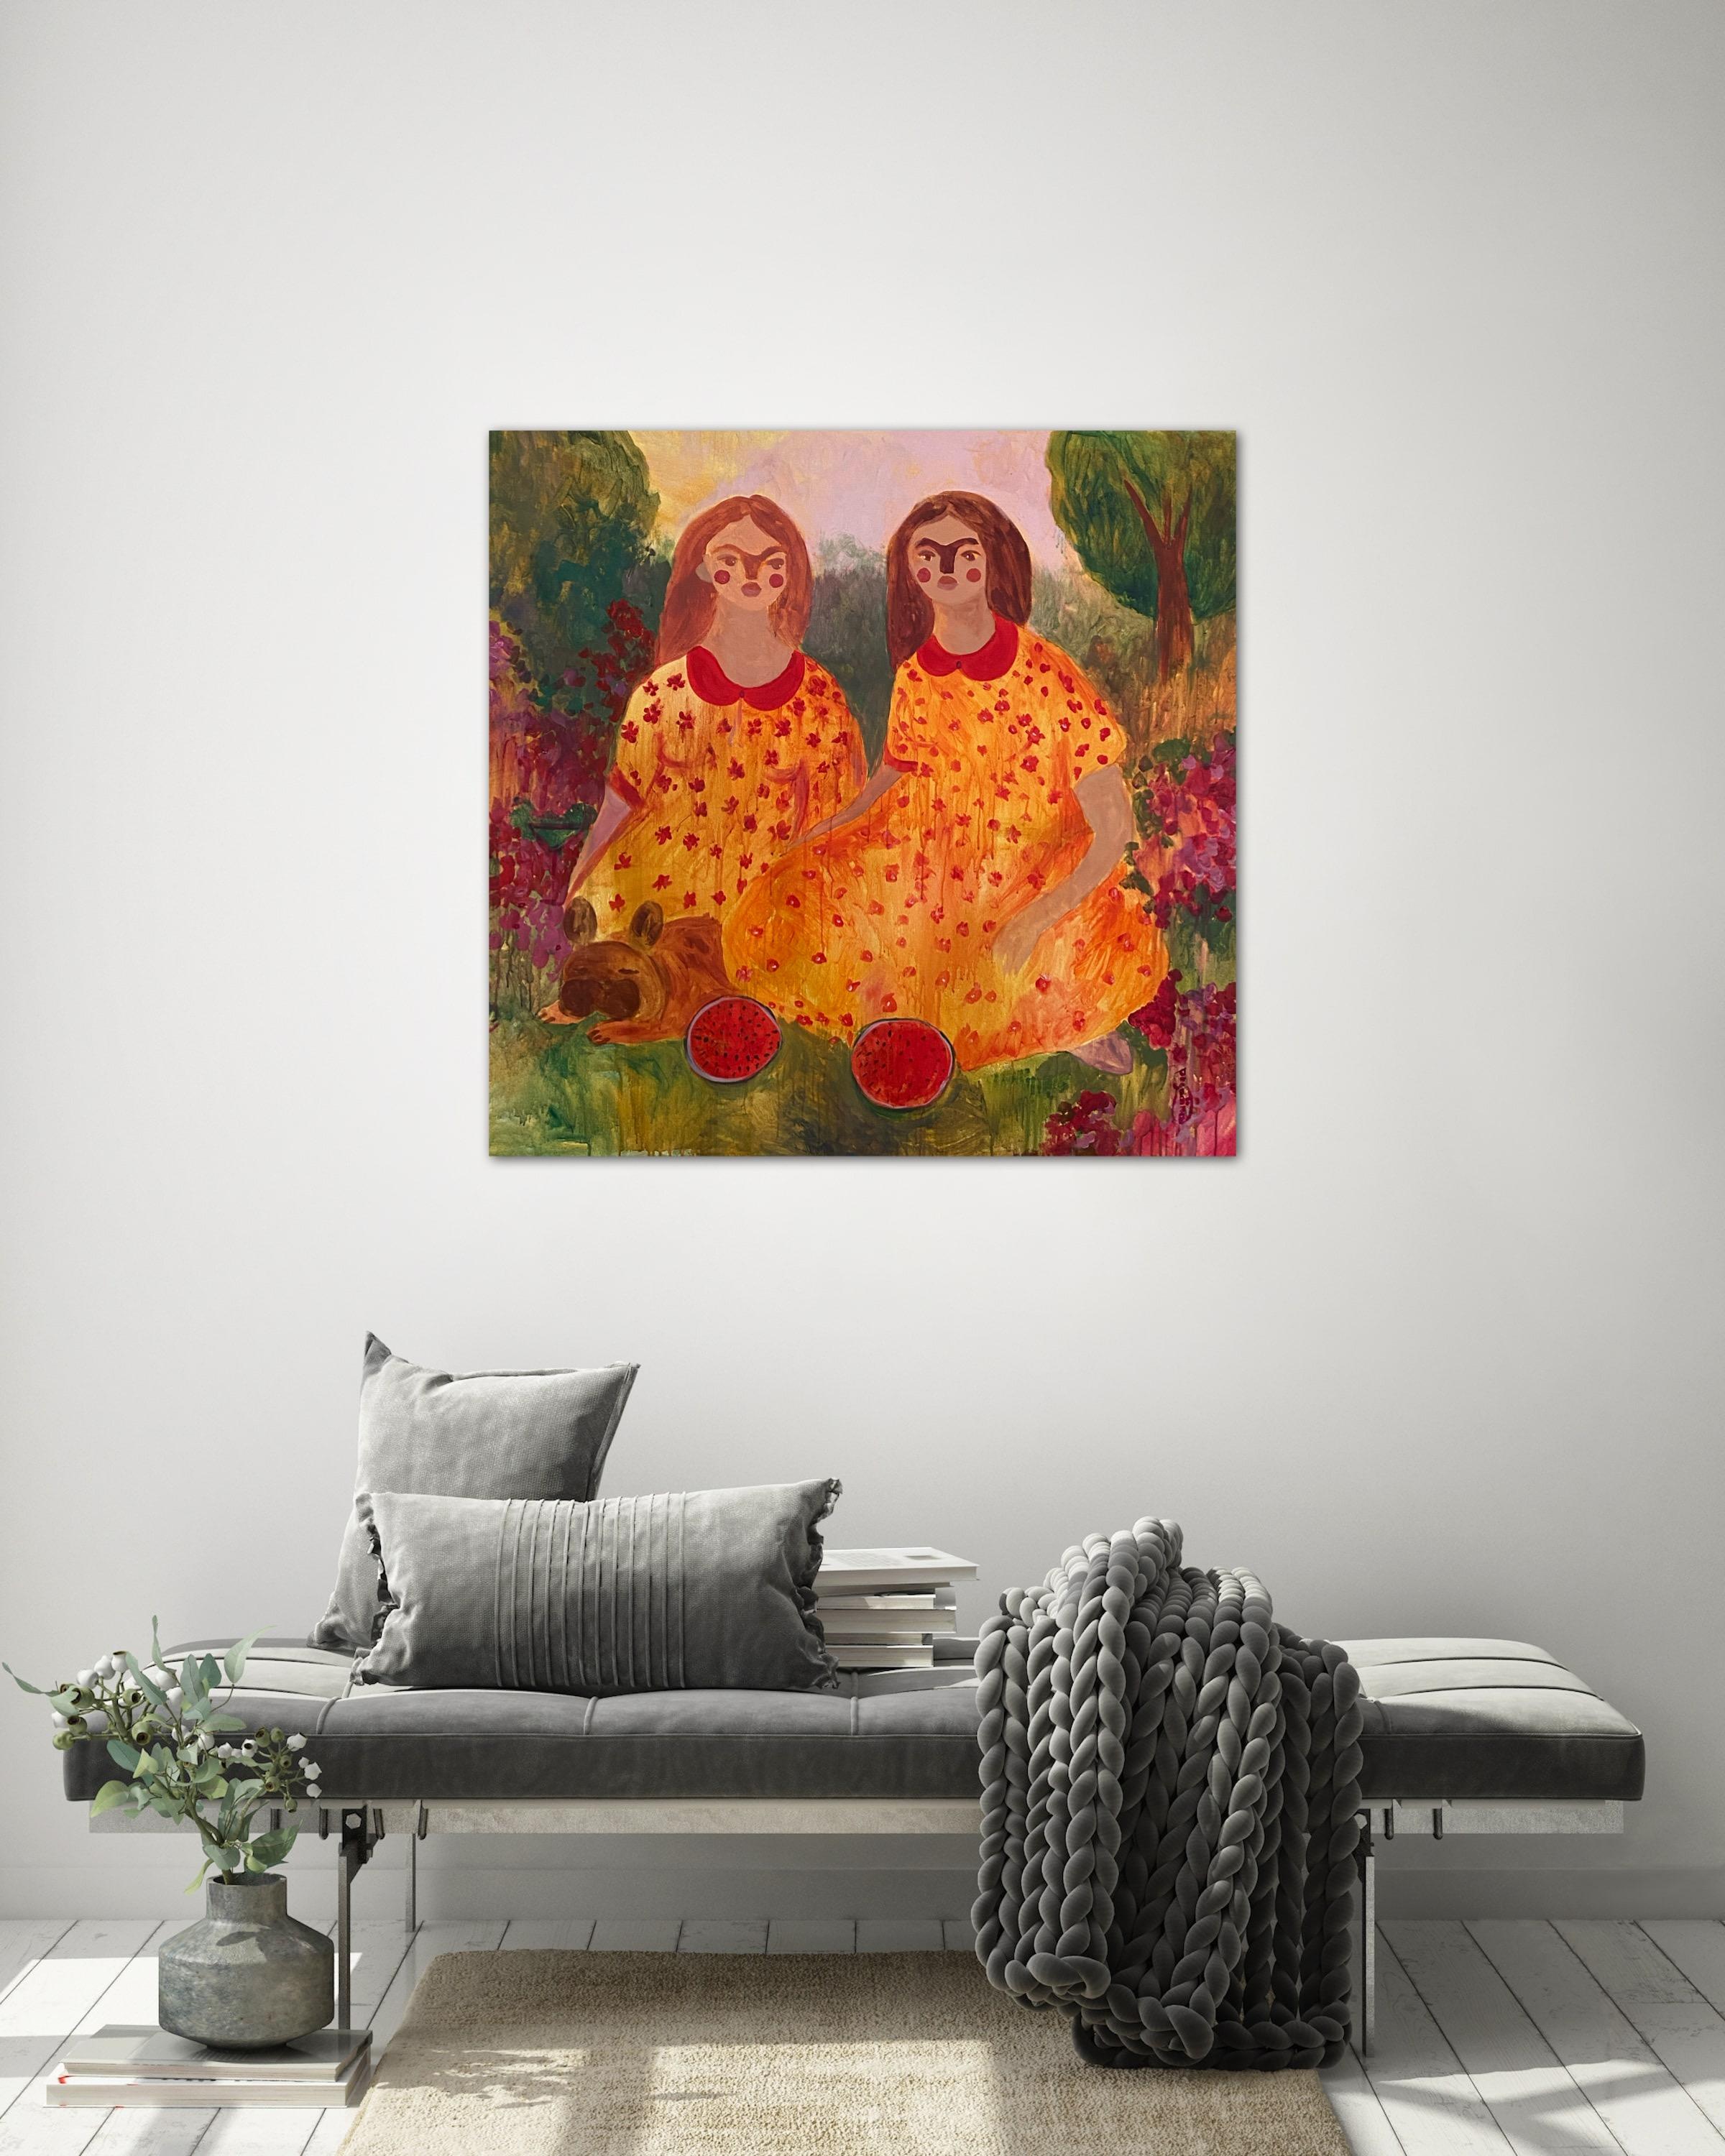 Sisters at a Picnic in the Garden - Painting by Dasha Pogodina